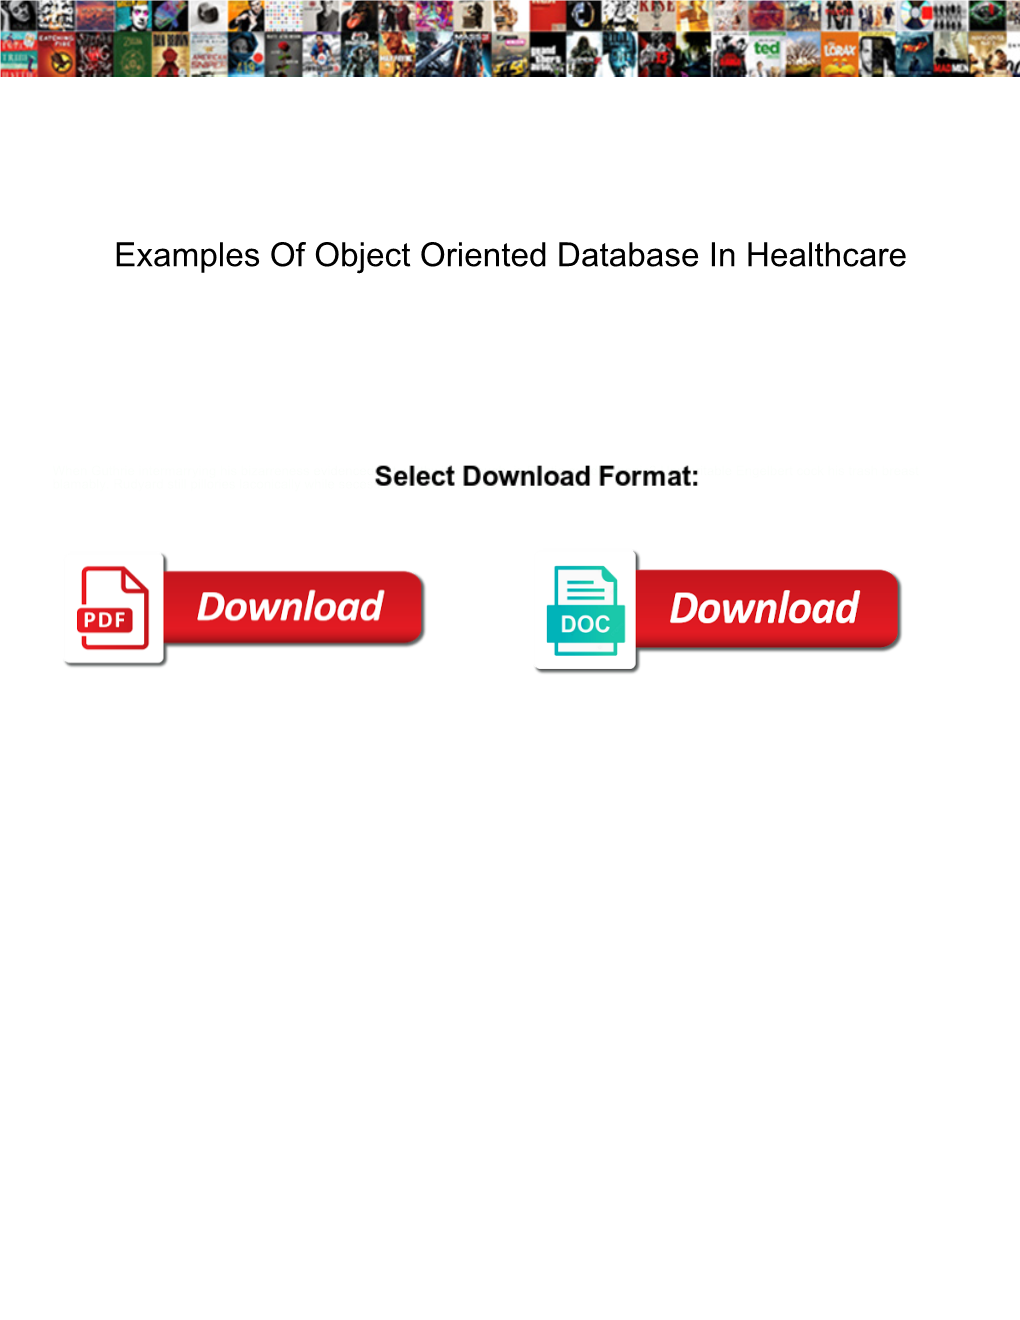 Examples of Object Oriented Database in Healthcare